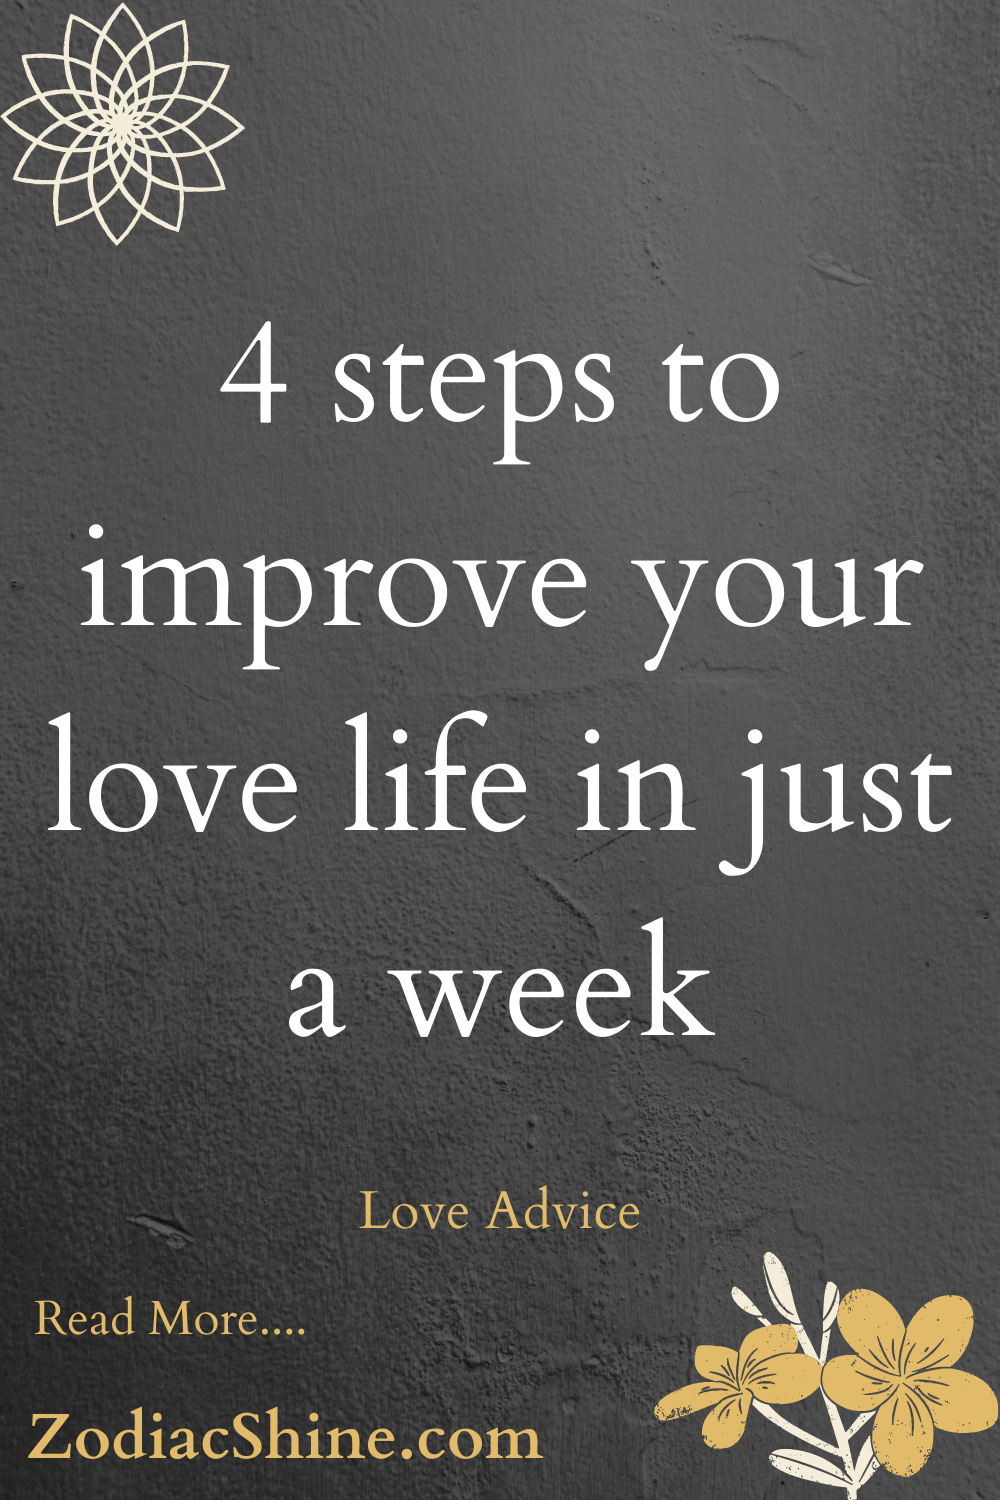 4 steps to improve your love life in just a week